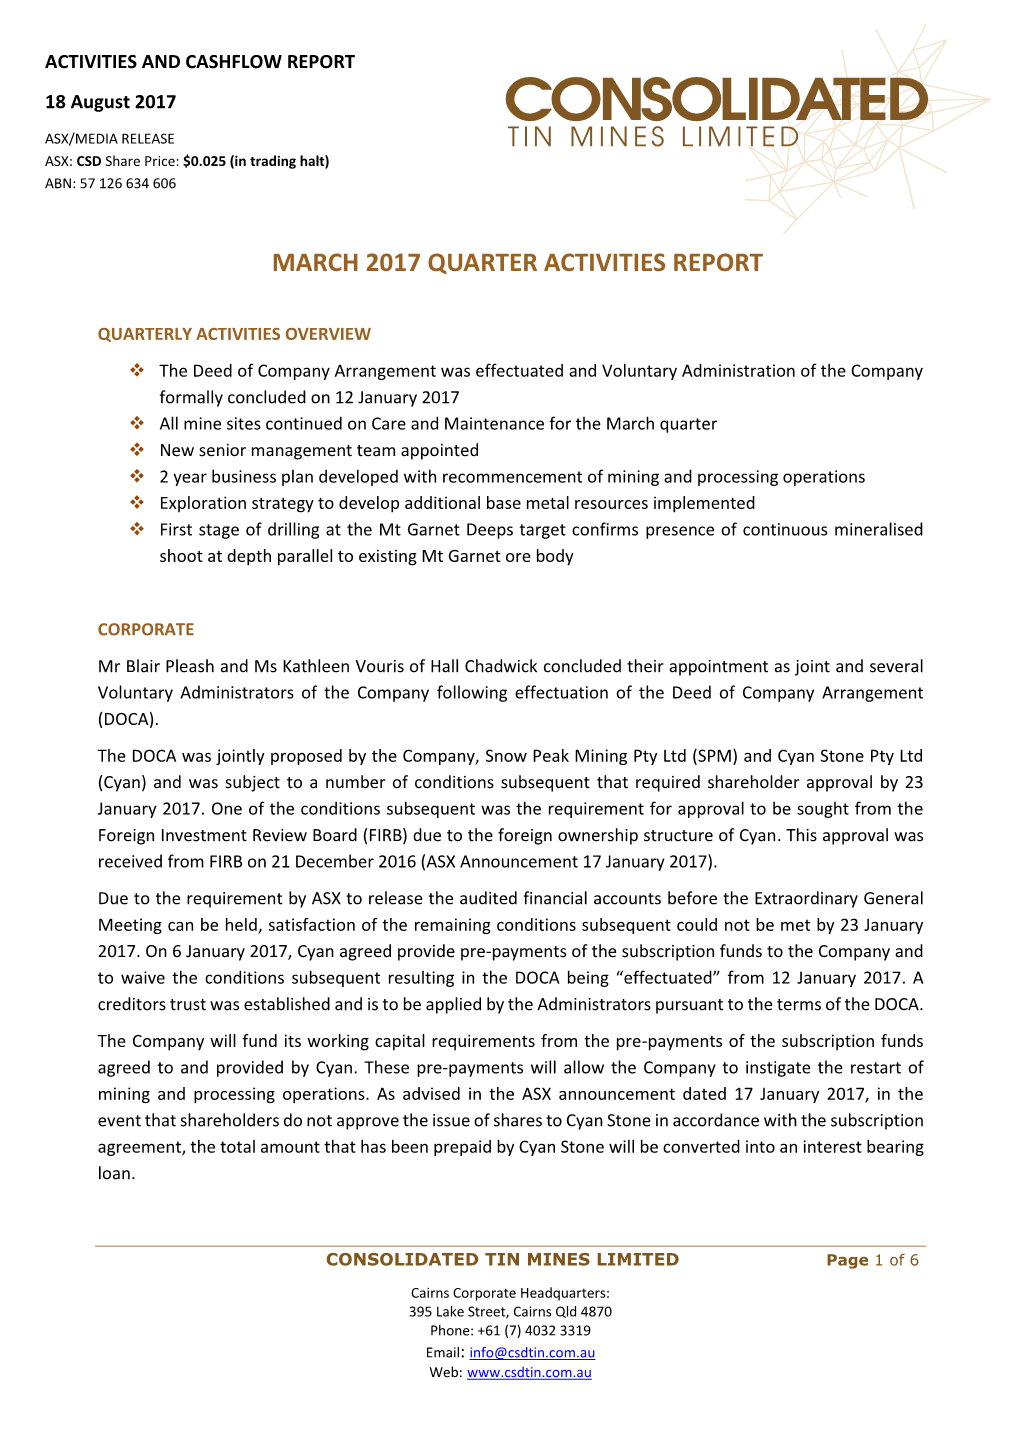 Tin Mines Limited March 2017 Quarter Activities Report